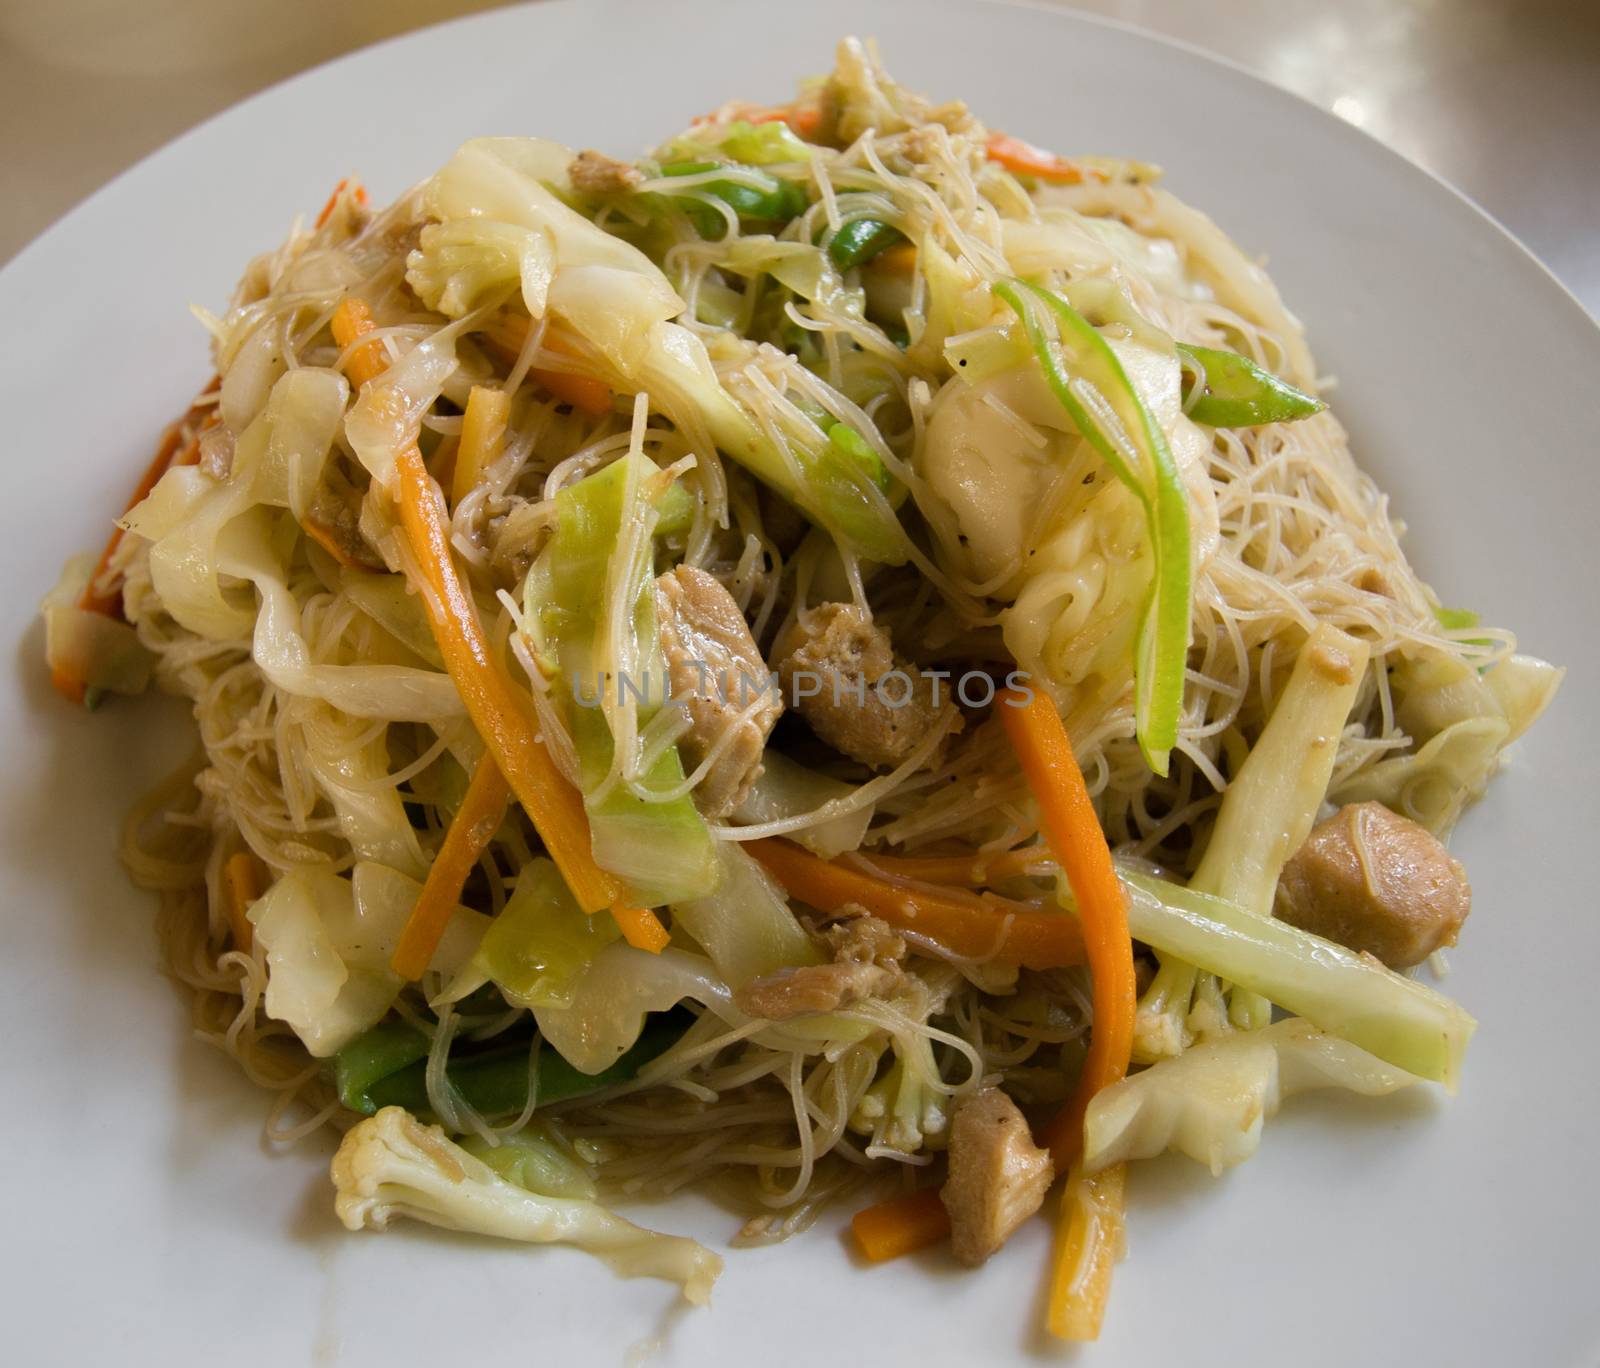 STIR FRIED RICE VERMICELLI WITH VEGETABLES by PrettyTG